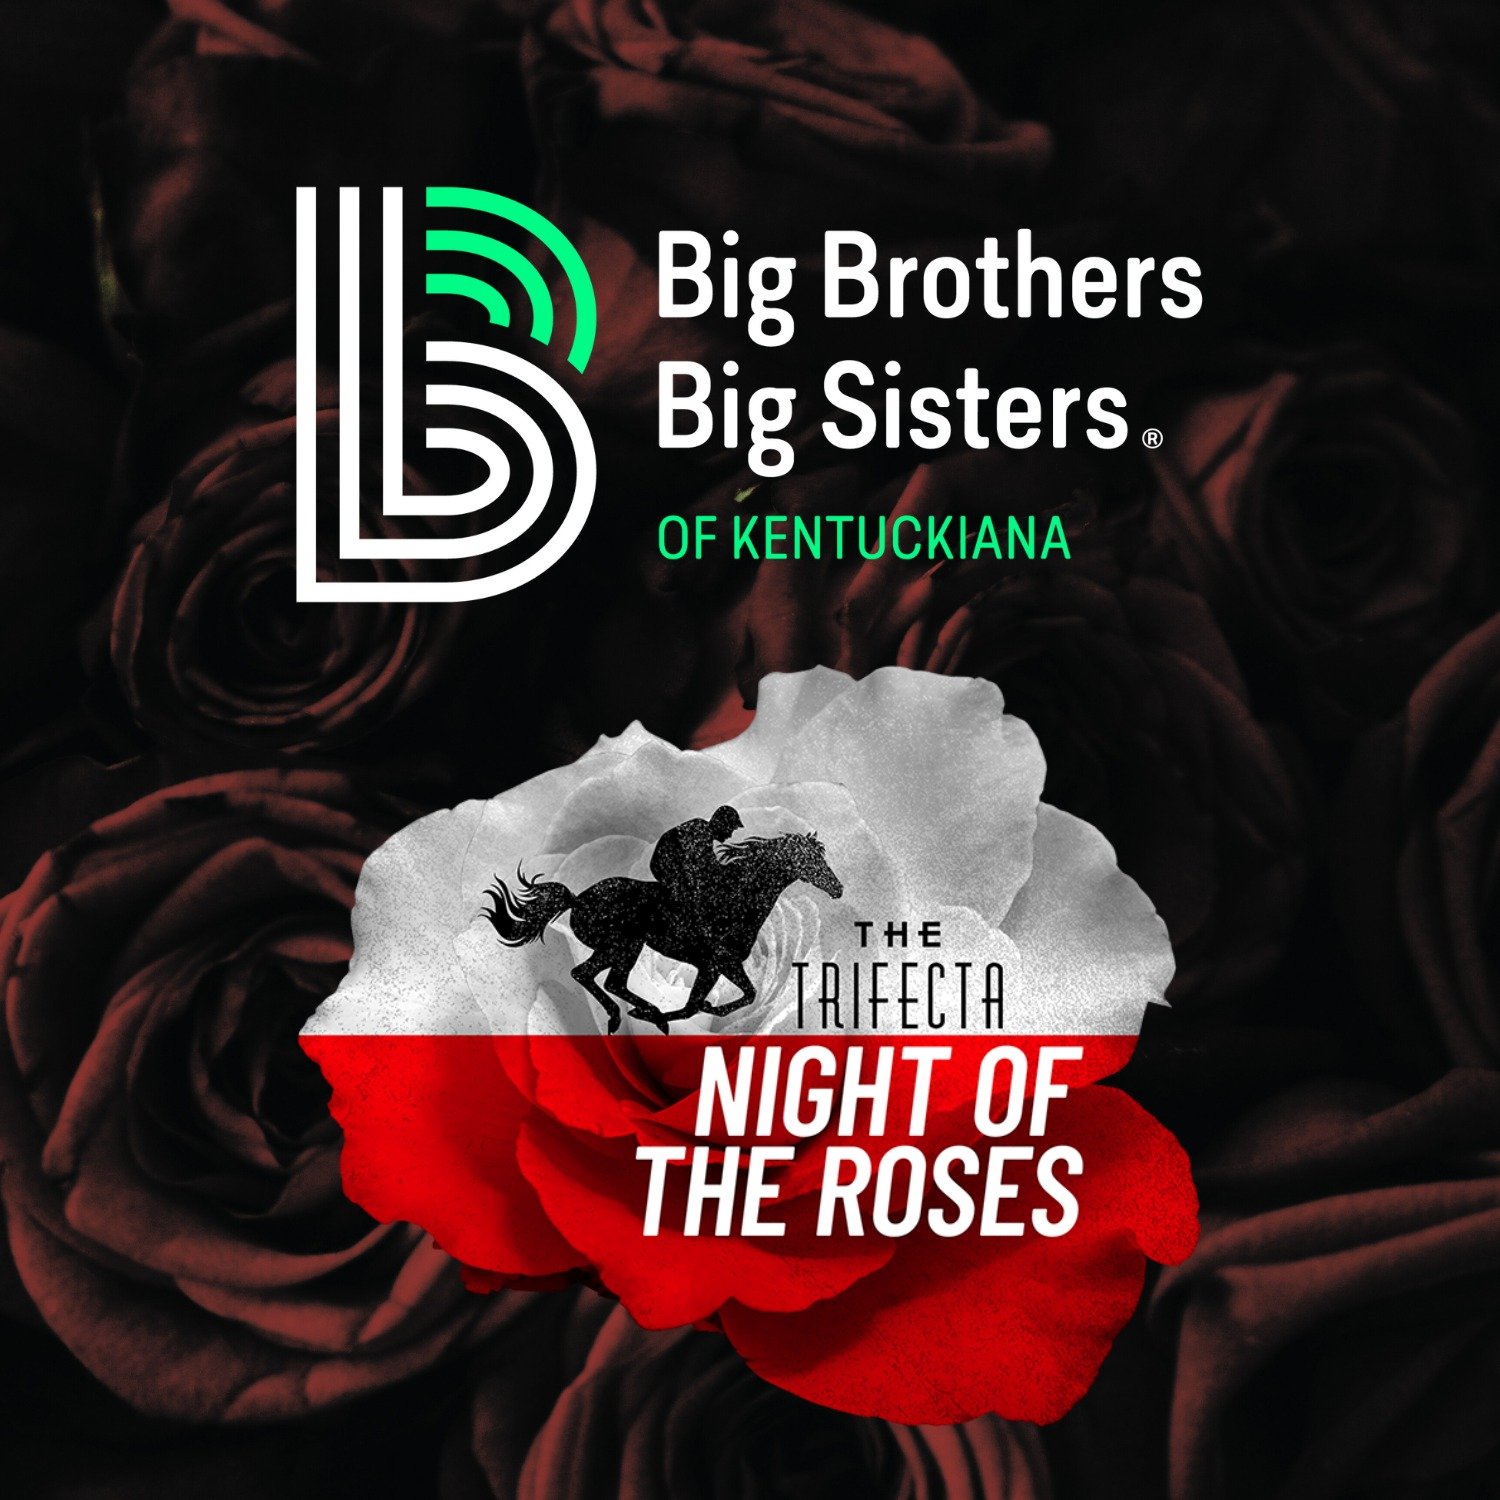 🏇 On the eve of the 150th Kentucky Derby, The Trifecta will spin the soul of the Derby into an unforgettable party that pays homage to the invaluable contributions of African Americans to Derby history. And this year, Big Brothers Big Sisters of Ken